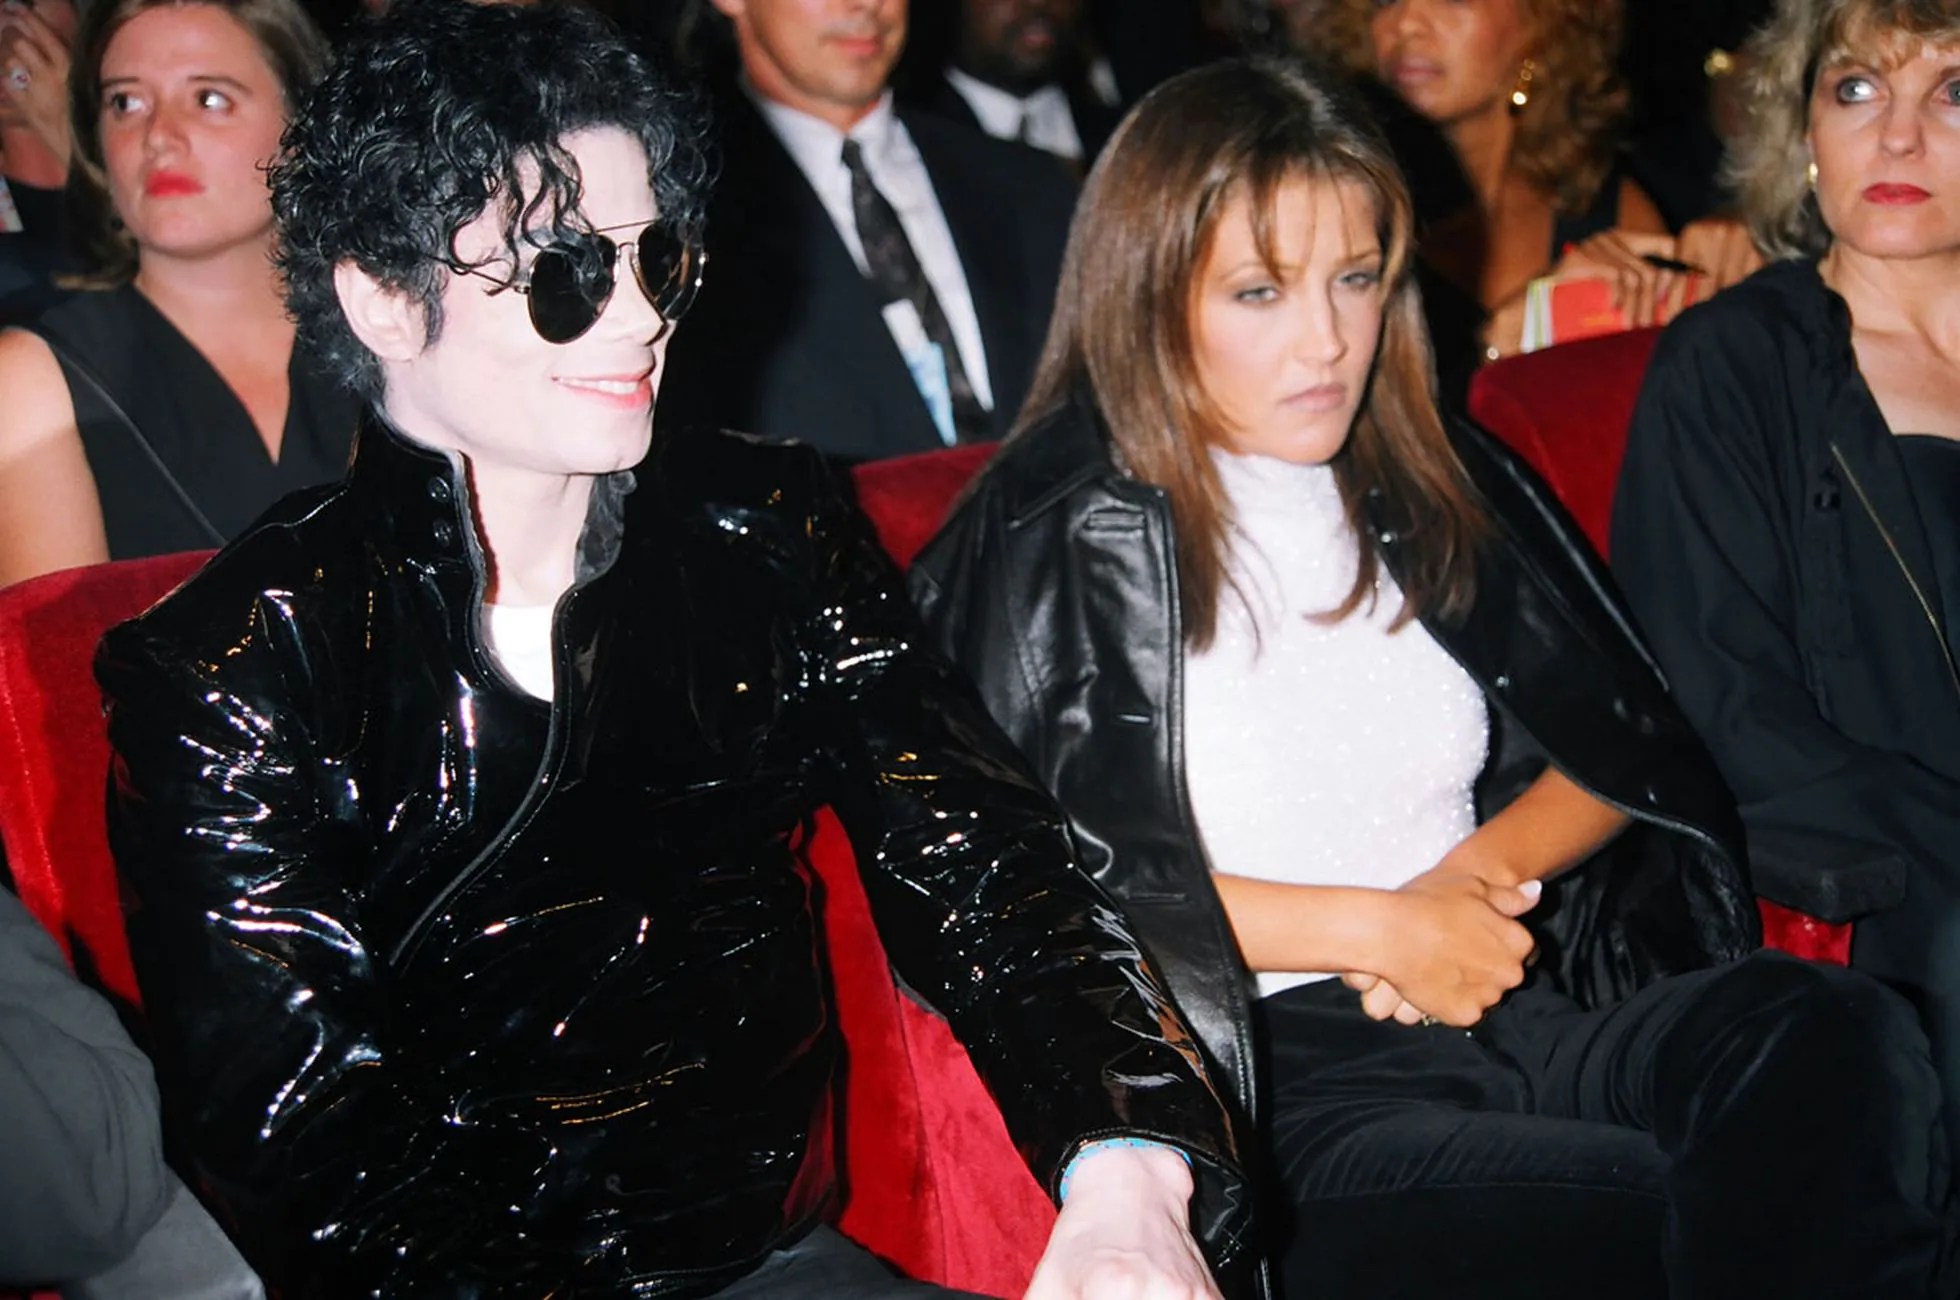 Michael Jackson and Lisa Marie Presley The 20month marriage of the